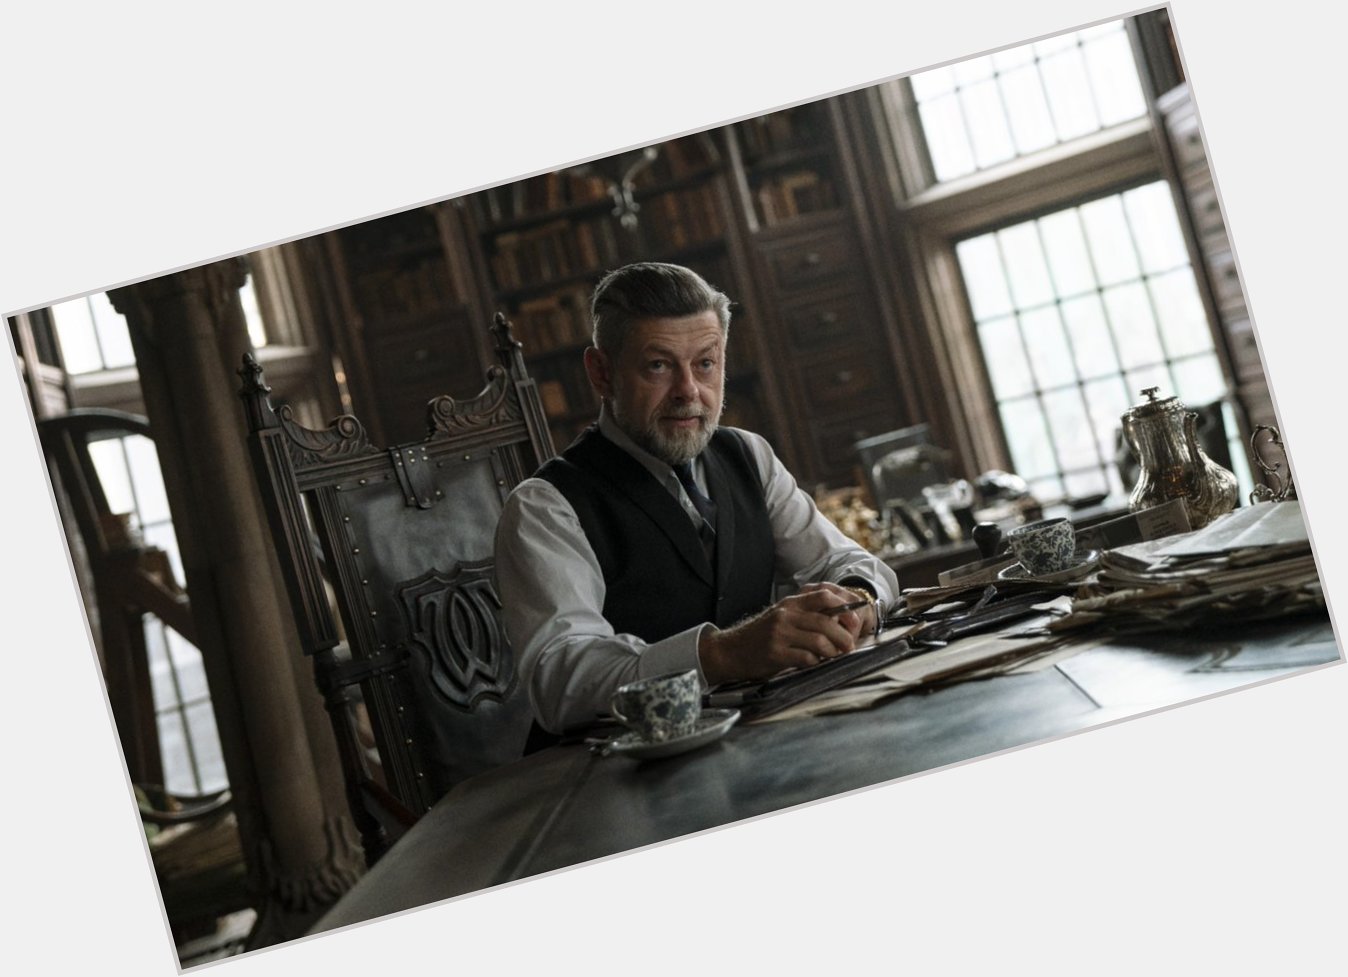 Happy birthday to the man who can do it all! Cheers to actor, director, producer and innovator, Andy Serkis! 